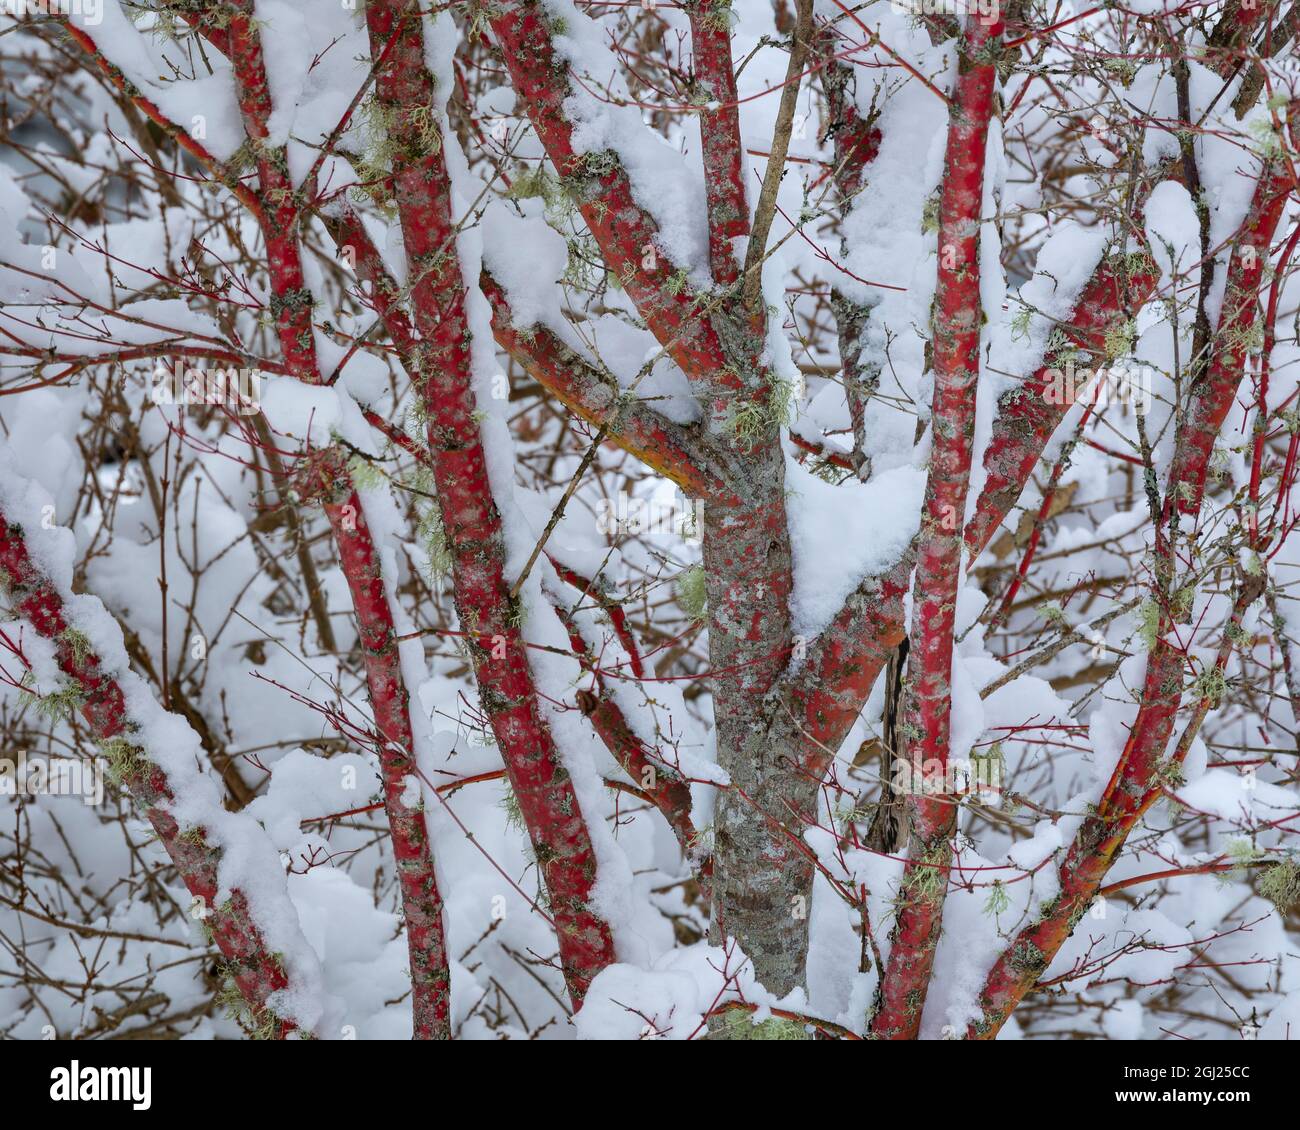 USA, Washington State, Seabeck. Snow-covered coral bark Japanese maple tree. Credit as: Don Paulson / Jaynes Gallery / DanitaDelimont.com Stock Photo